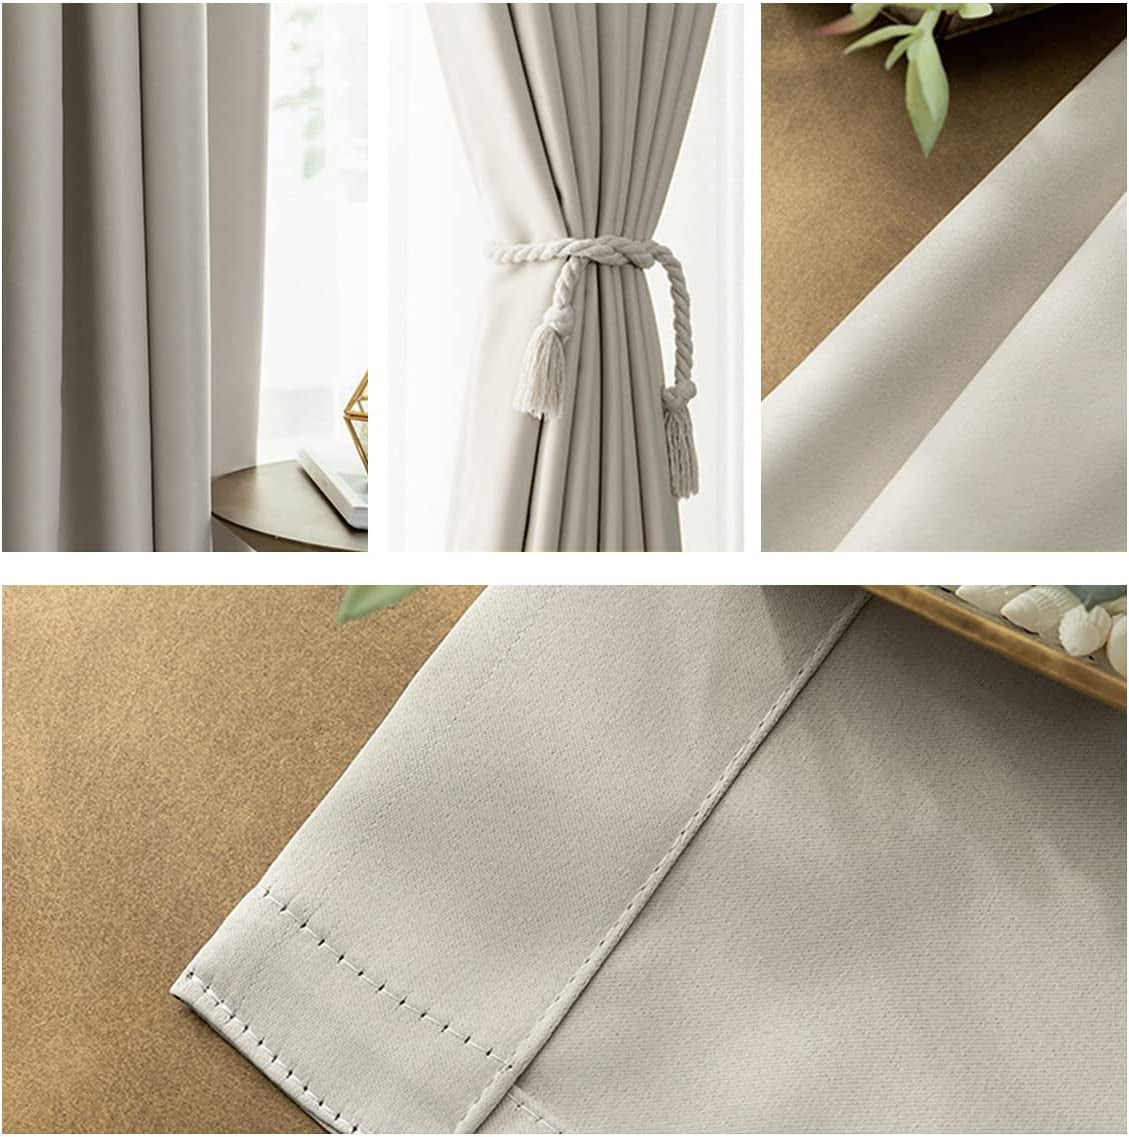 IYUEGO Pinch Pleat Solid Thermal Insulated 95% Blackout Patio Door Curtain Panel Drape for Traverse Rod and Track, Beige 52" W X 84" L (One Panel)  I Love Curtains   